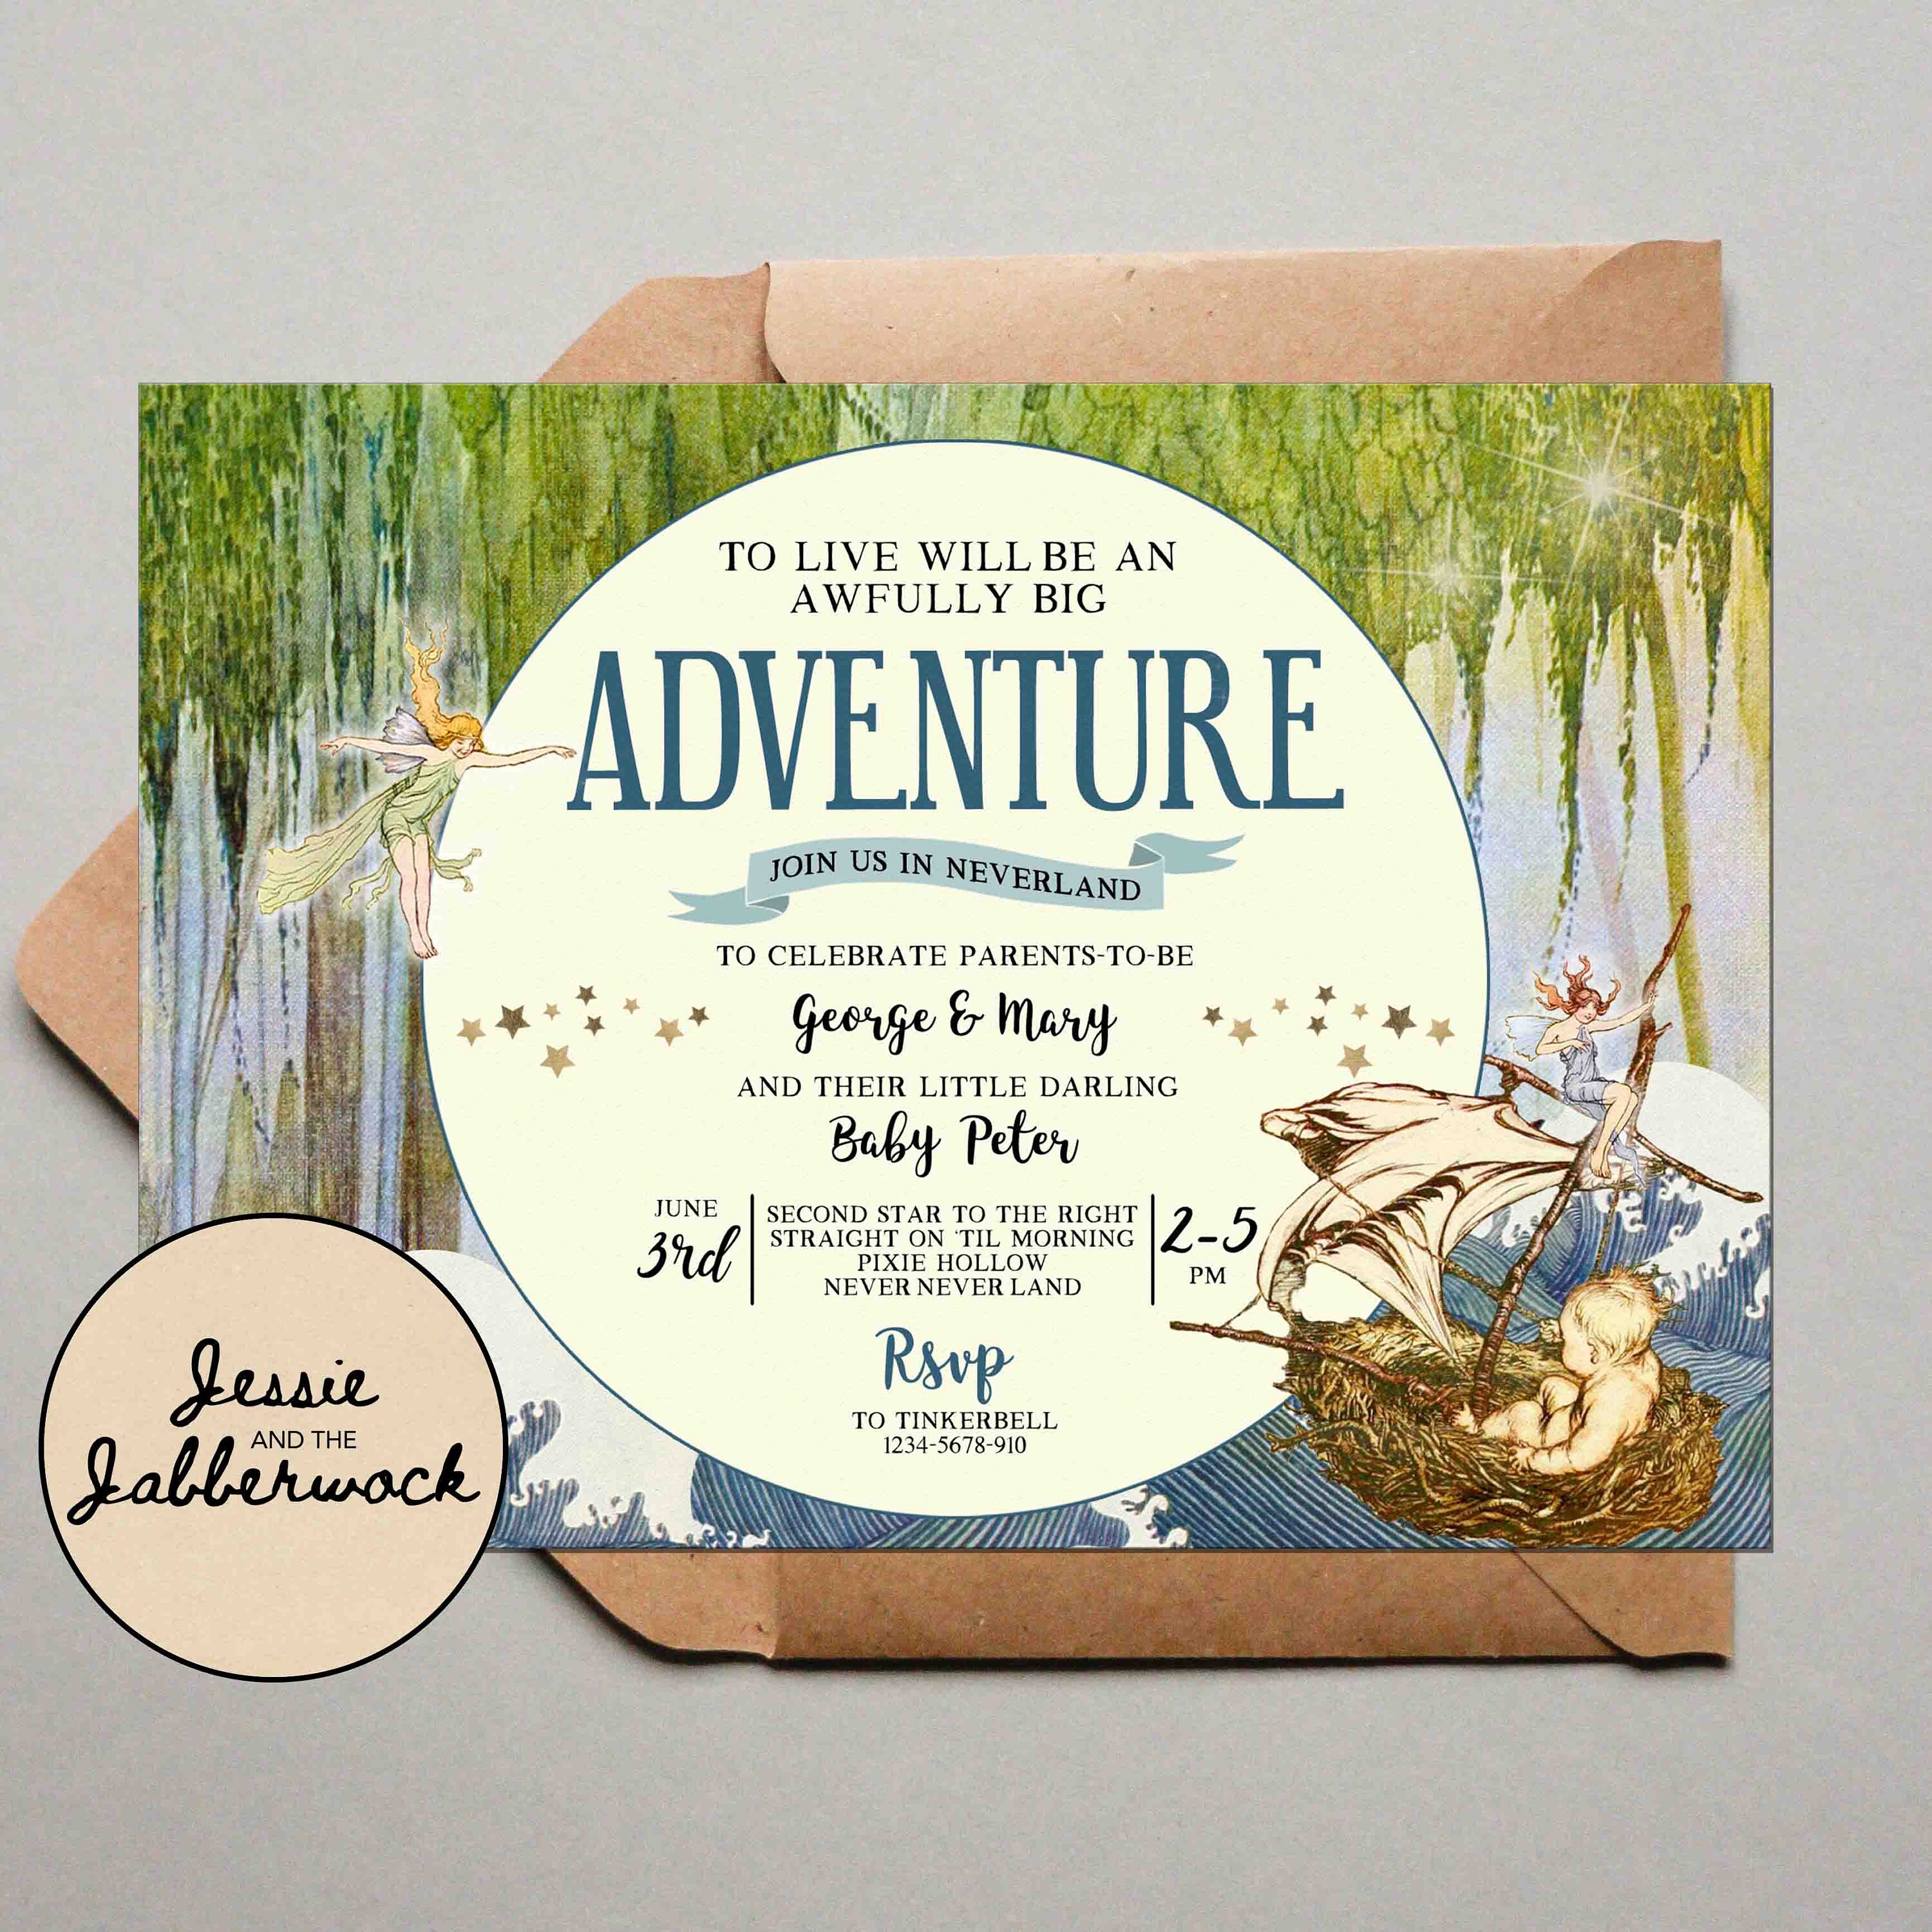 Neverland Baby Shower Invites, Vintage Peter Pan Invitation, to